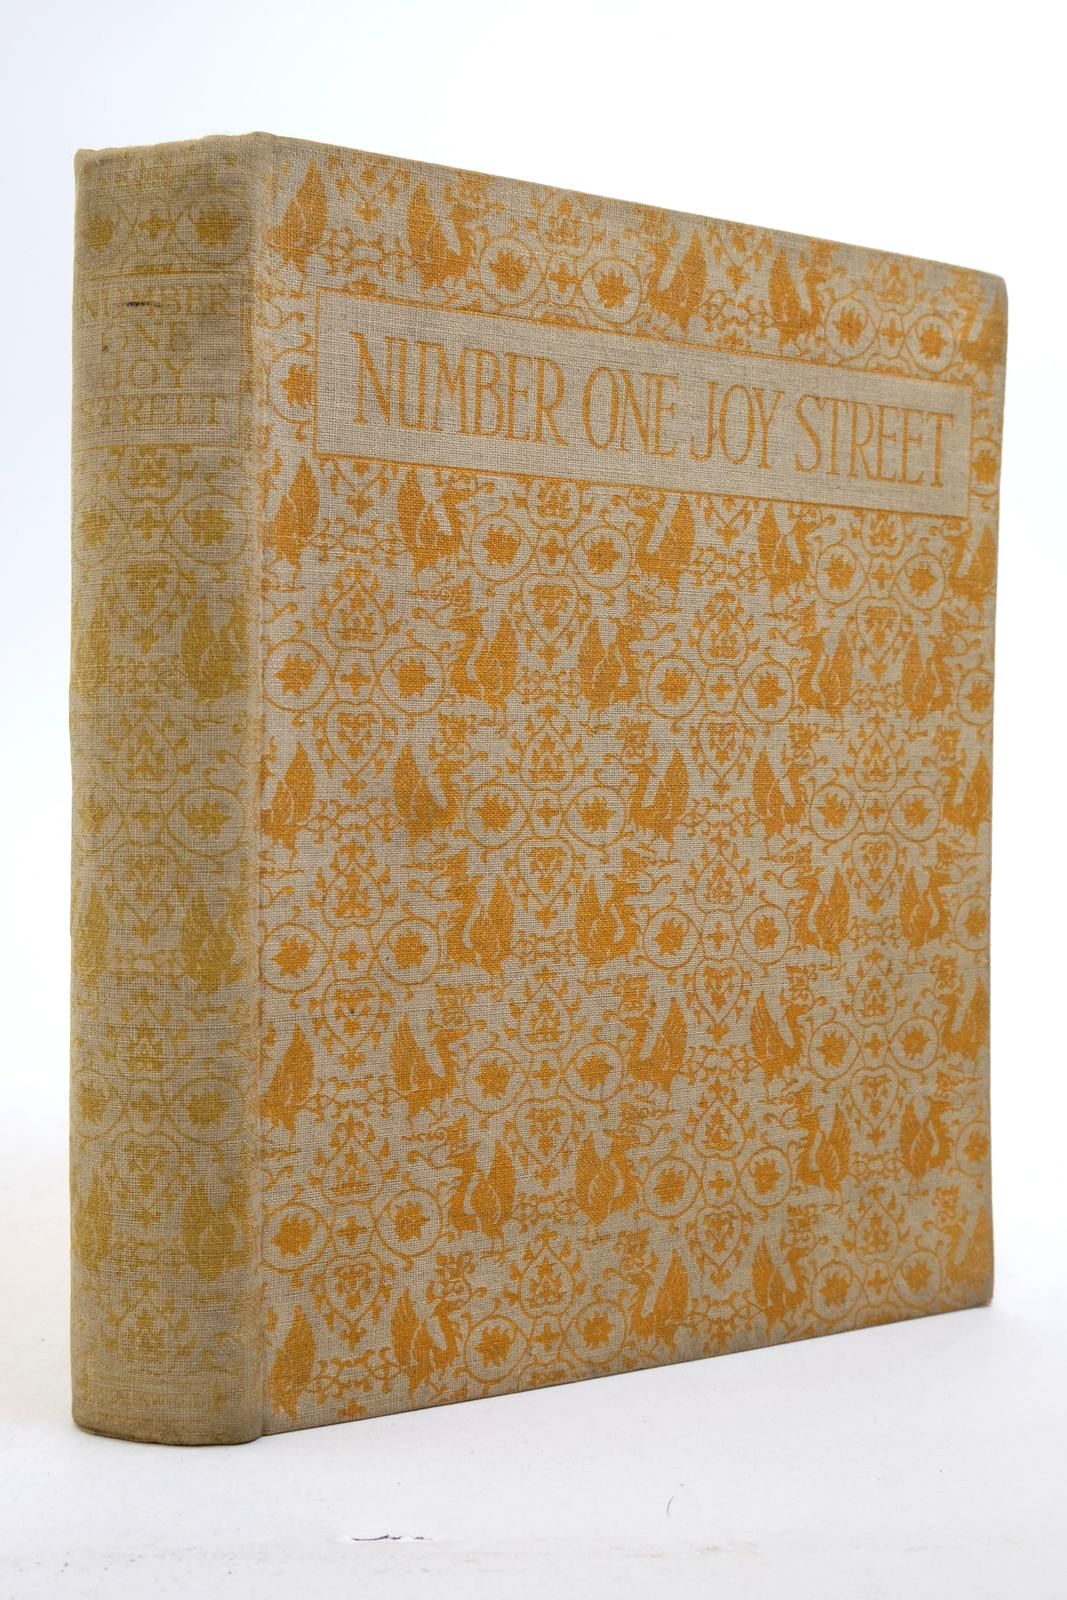 Photo of NUMBER ONE JOY STREET written by De La Mare, Walter Farjeon, Eleanor Belloc, Hilaire Fyleman, Rose et al,  illustrated by Buckels, Alec Nightingale, C.T. et al.,  published by Basil Blackwell (STOCK CODE: 2140031)  for sale by Stella & Rose's Books